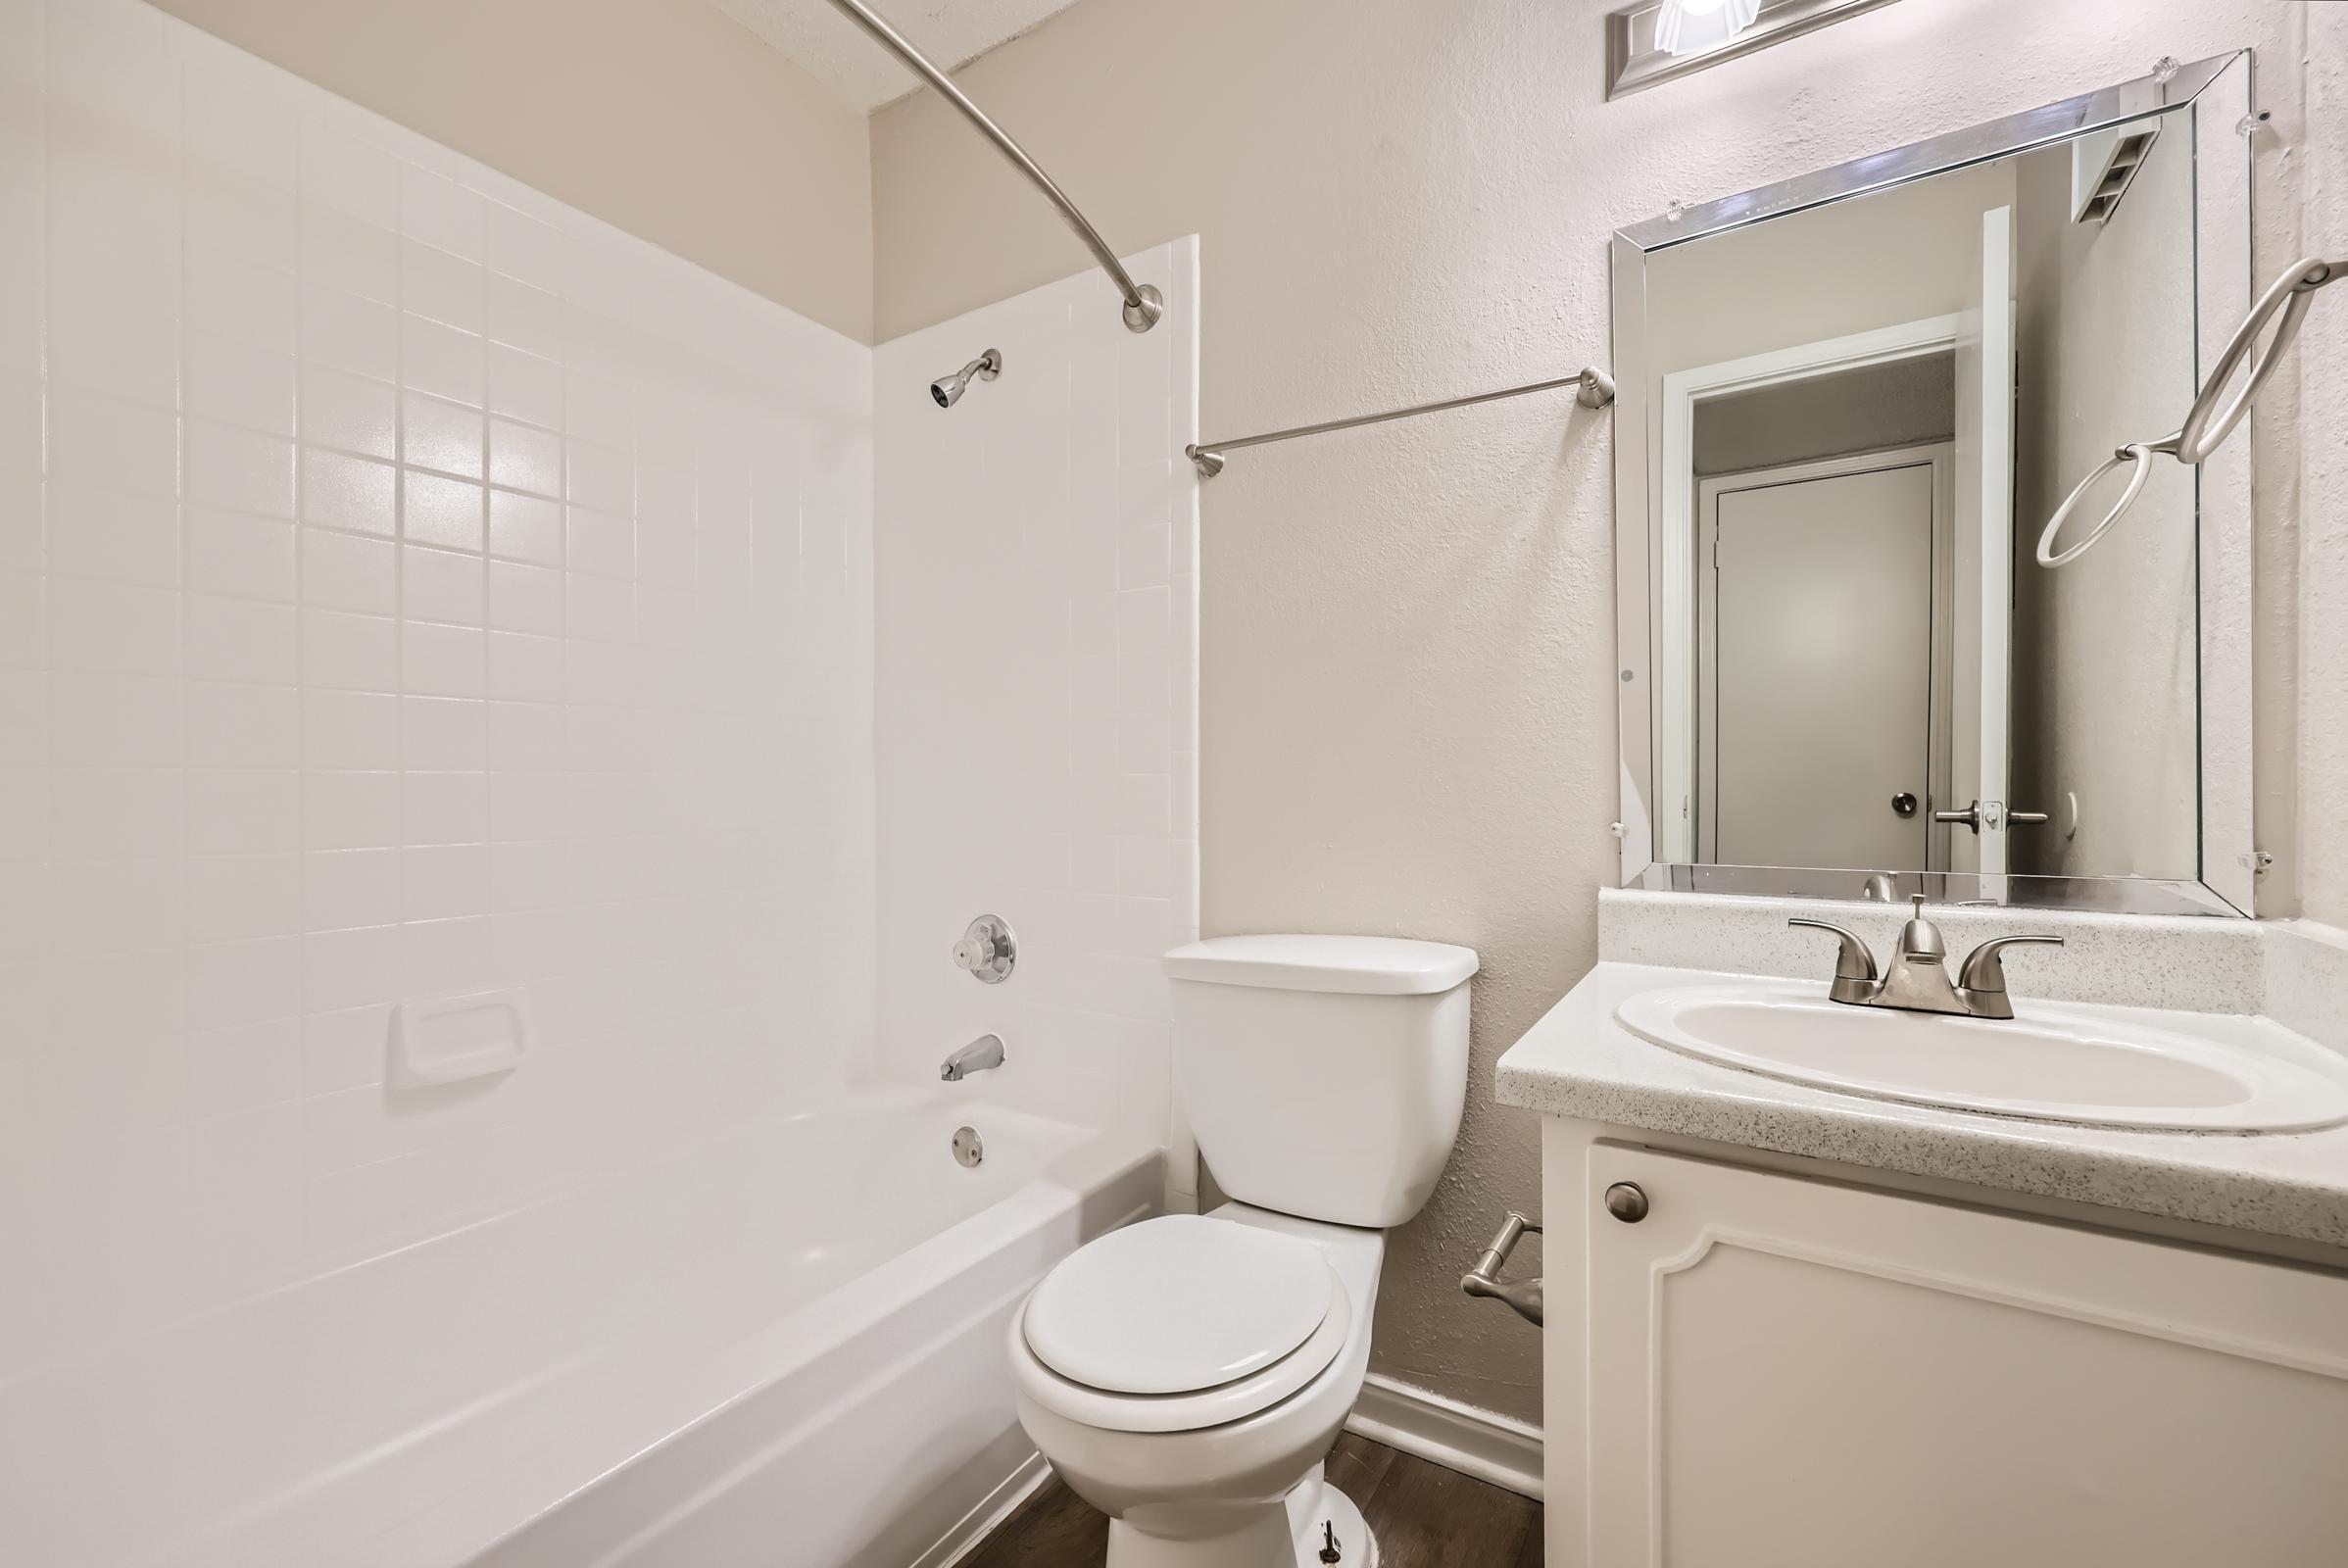 A Rise Oak Creek bathroom with a white vanity and mirror.